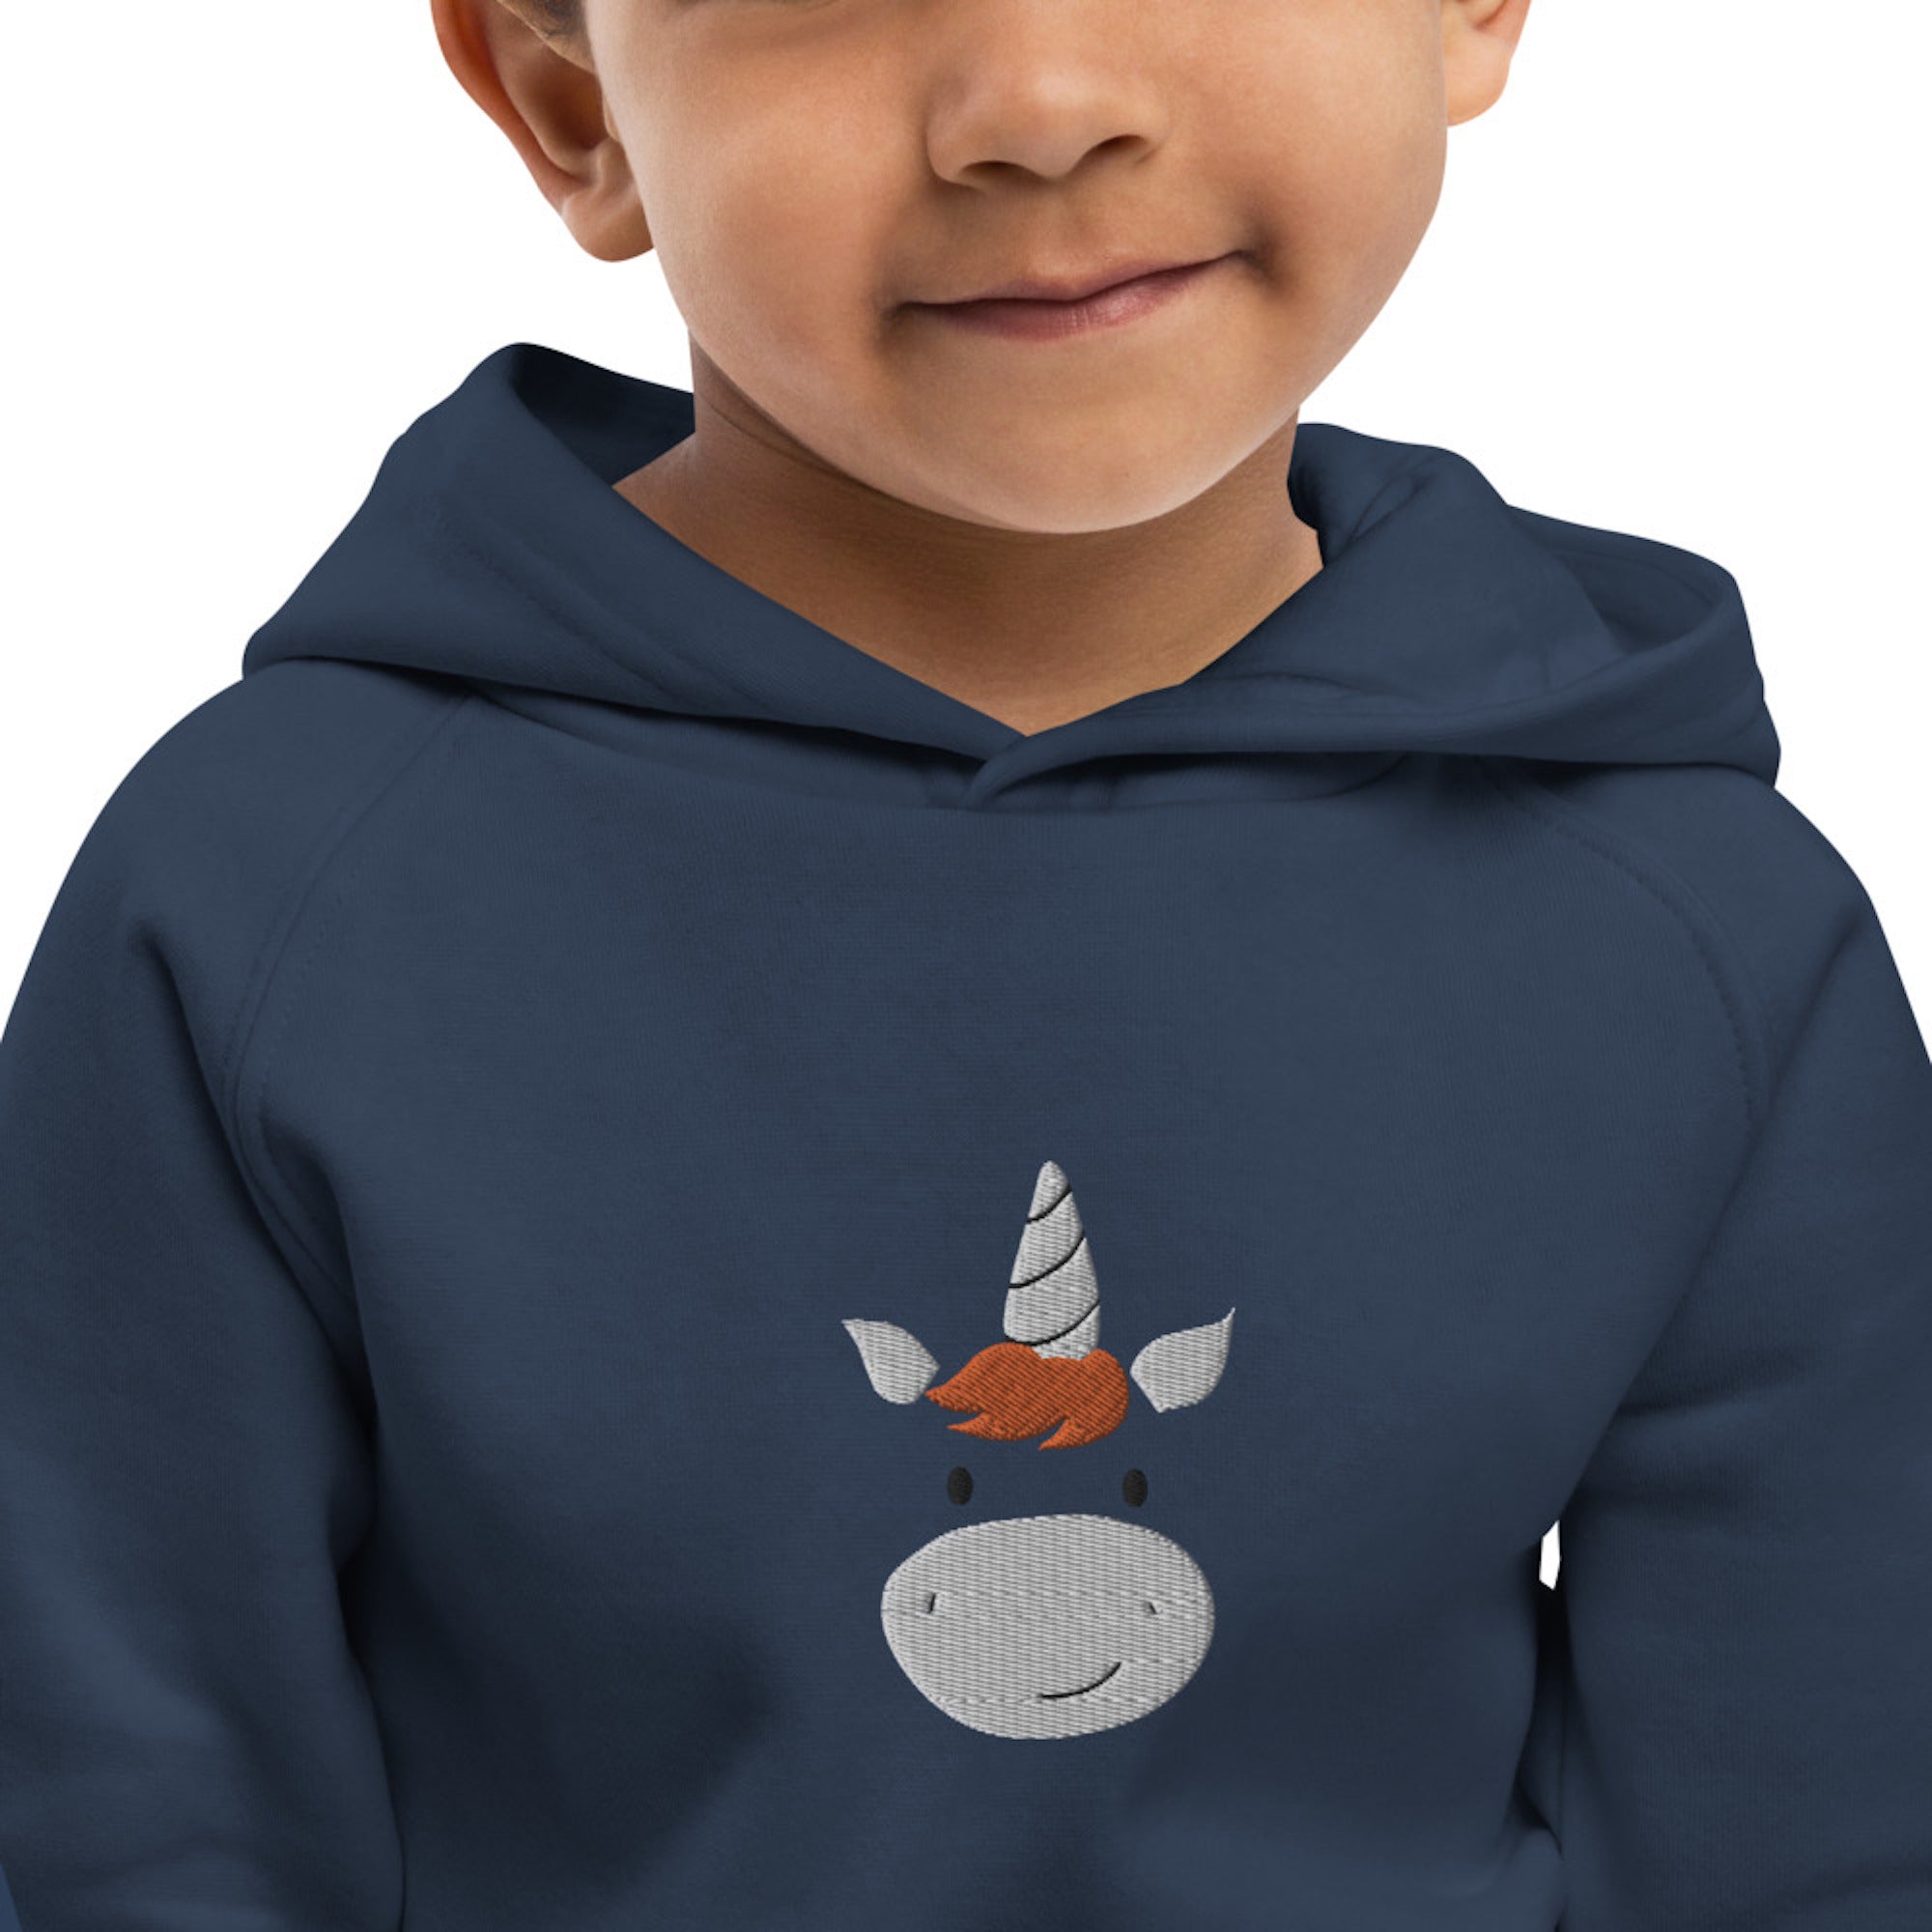 Unicorn Kids Eco Hoodie with cute animals, Organic Cotton pullover for children in black, gift idea for kids, soft hoodie for kids-5